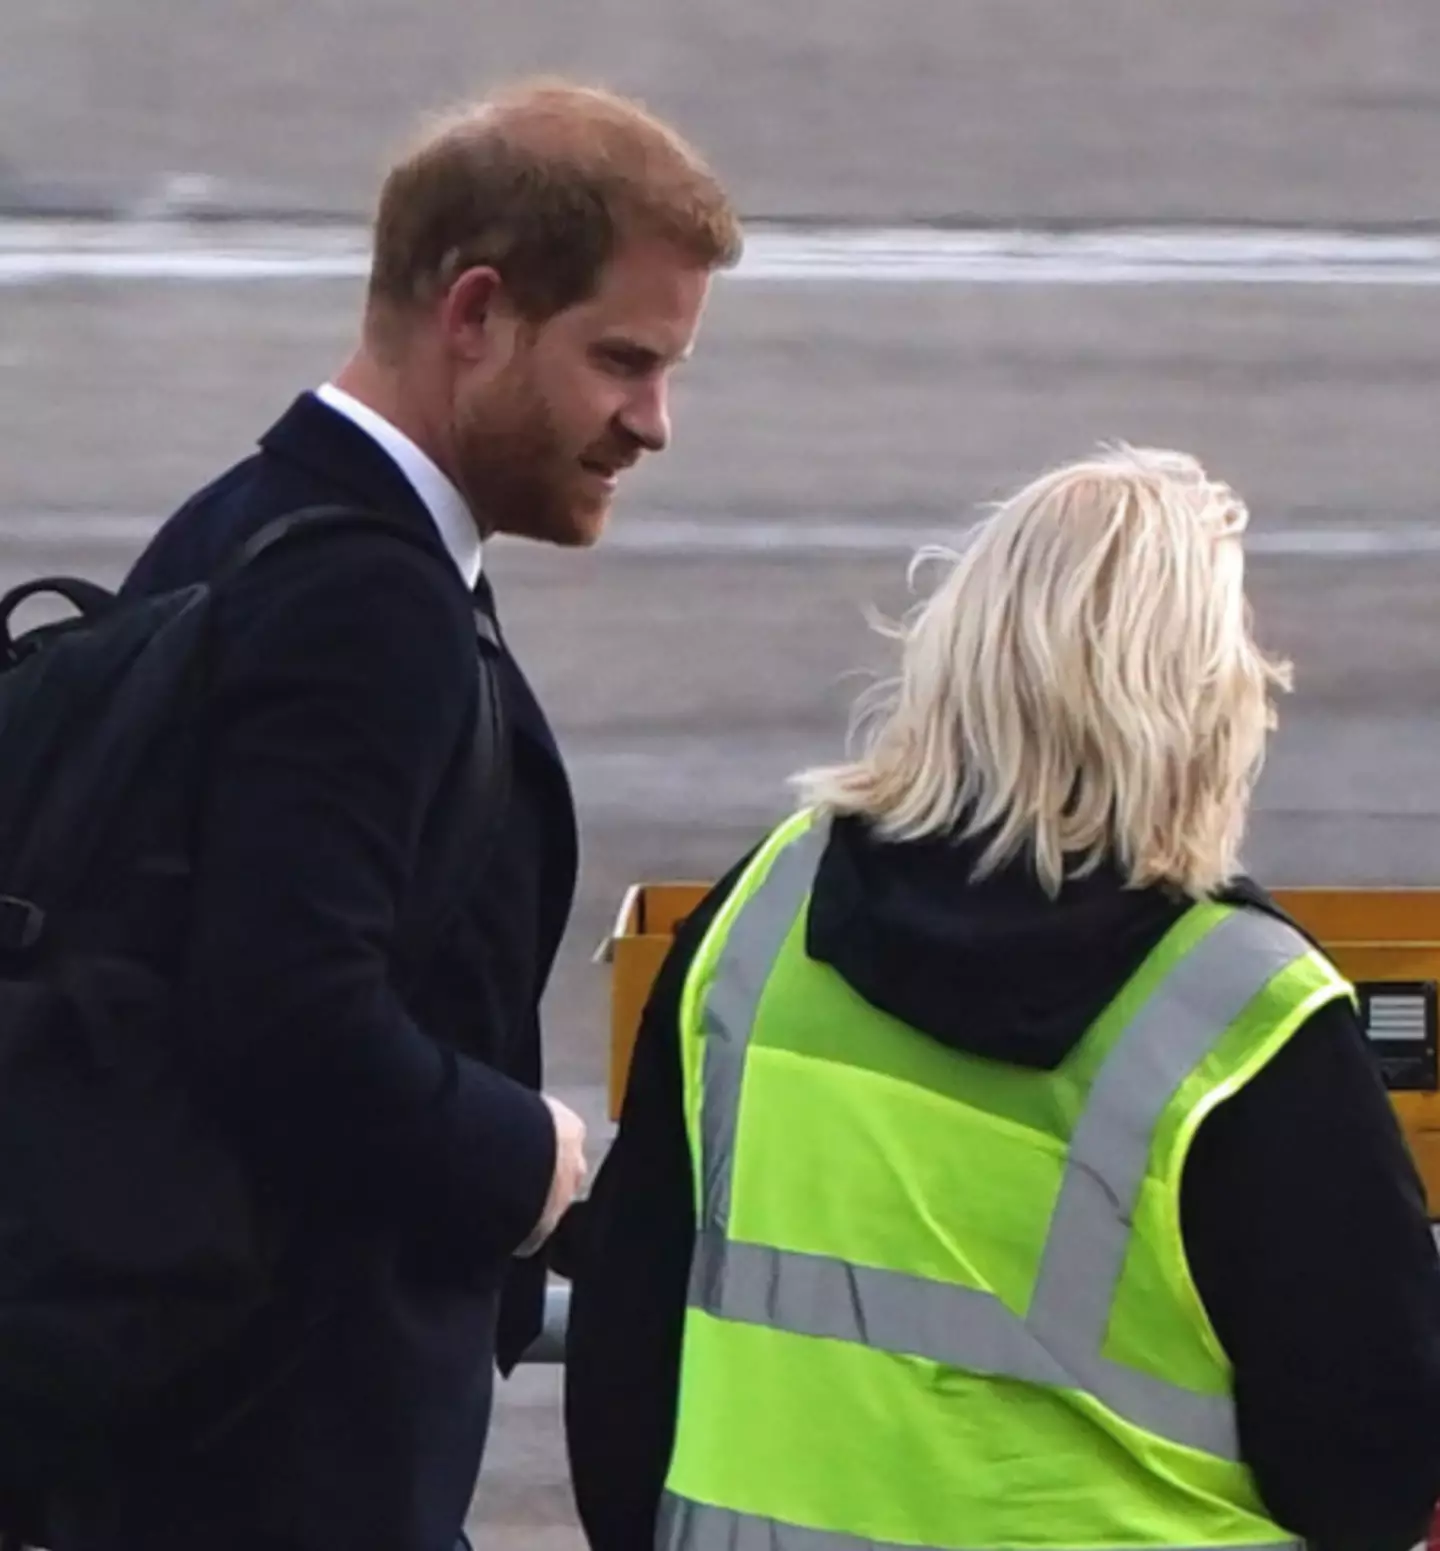 The Duke of Sussex is believed to be the first family member to leave after the Queen's passing on Thursday.